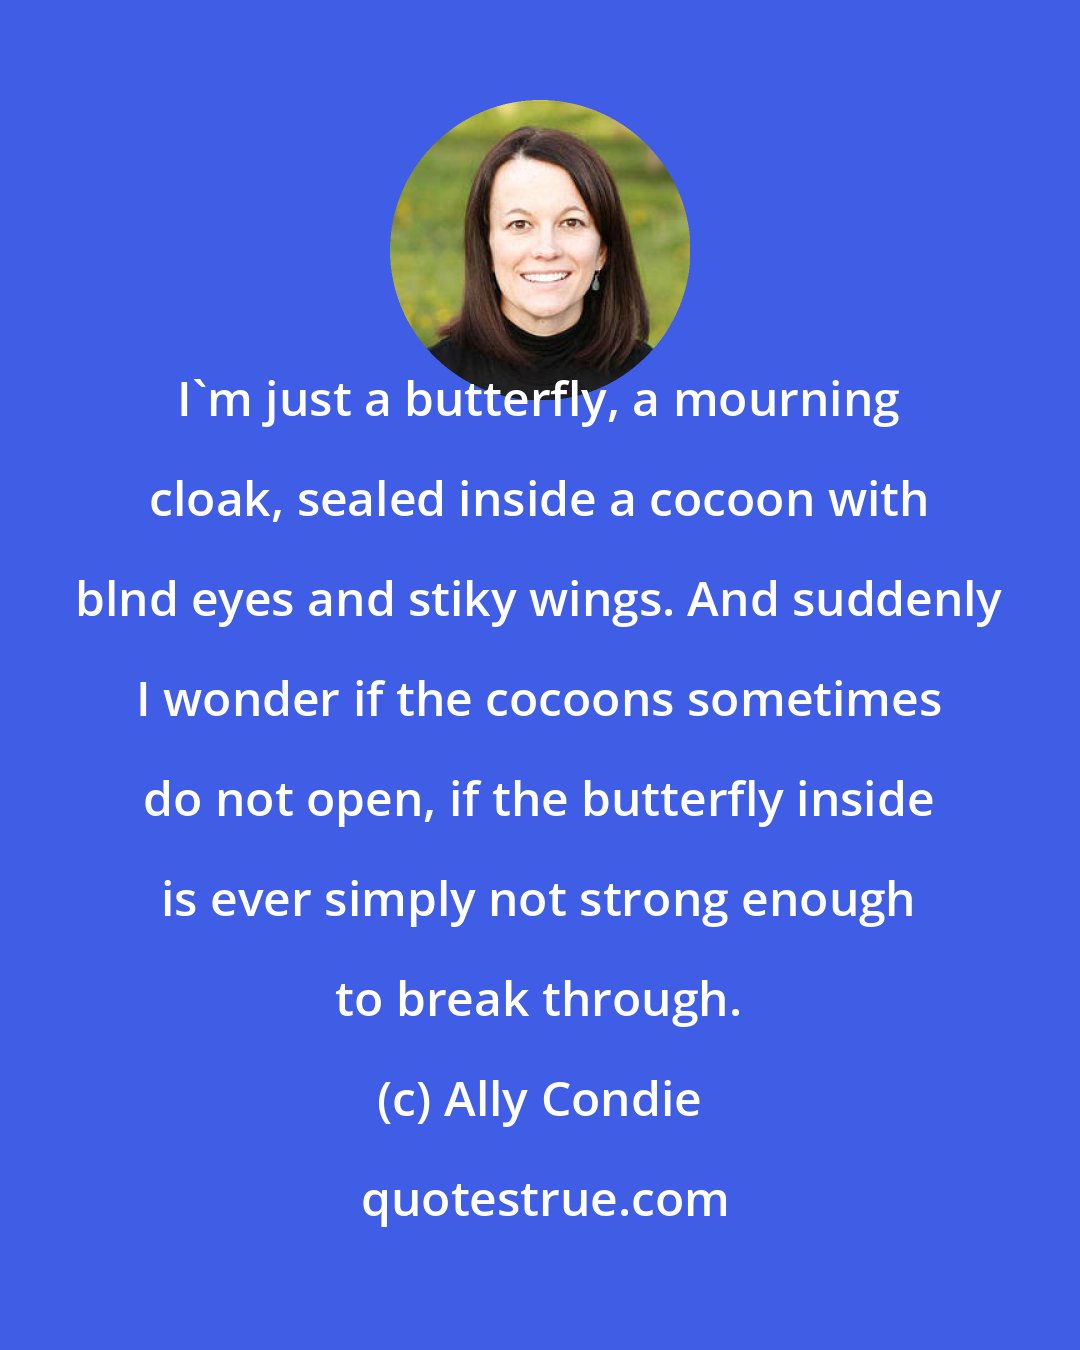 Ally Condie: I'm just a butterfly, a mourning cloak, sealed inside a cocoon with blnd eyes and stiky wings. And suddenly I wonder if the cocoons sometimes do not open, if the butterfly inside is ever simply not strong enough to break through.